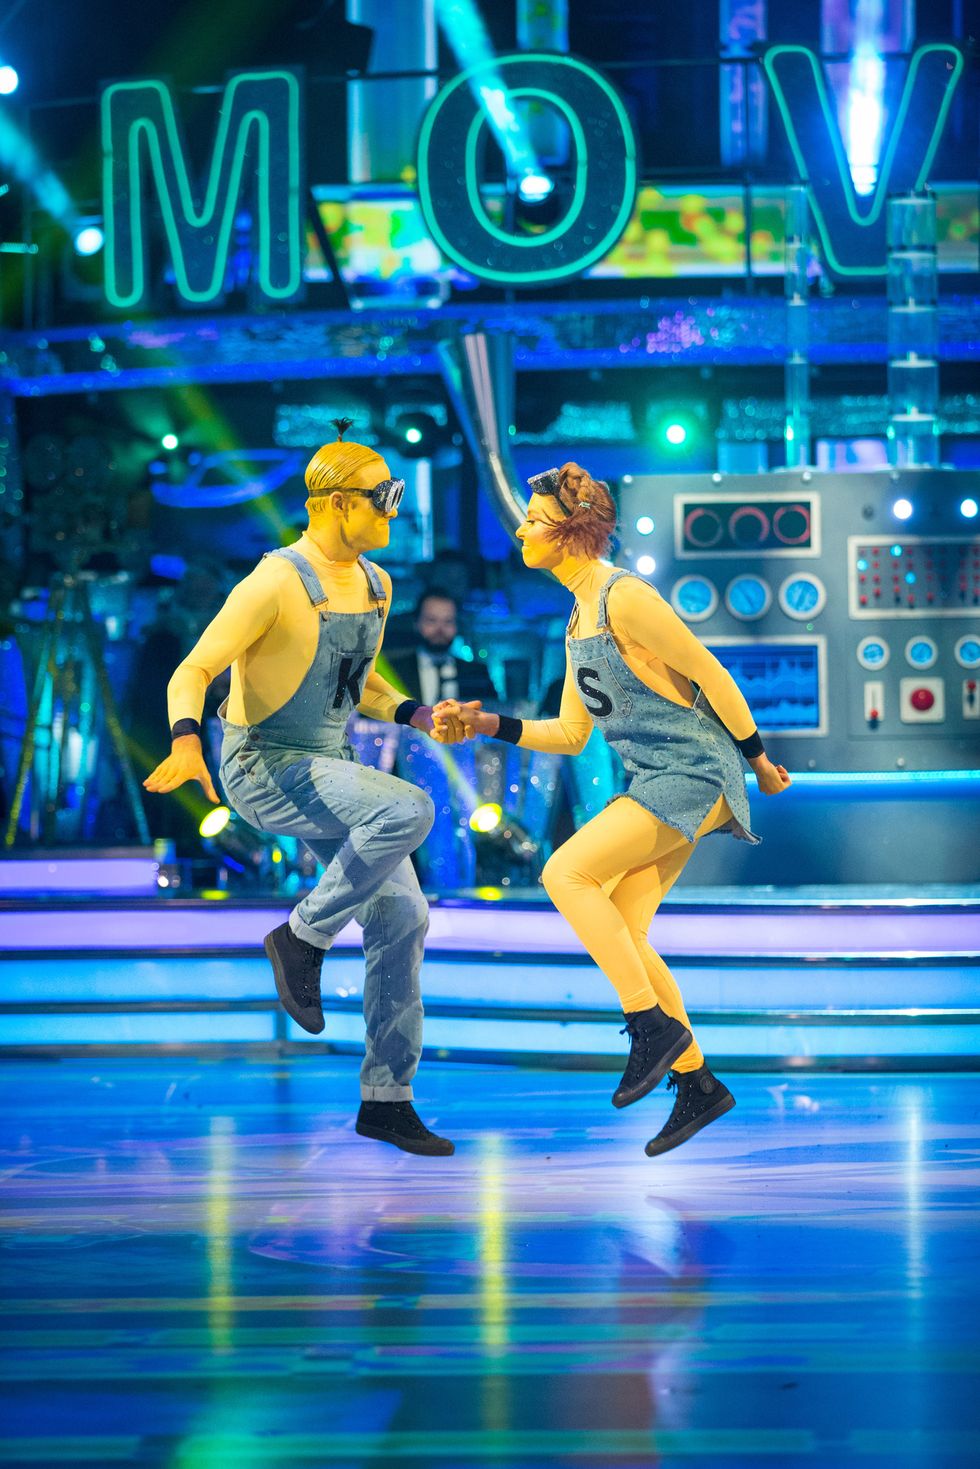 Strictly Come Dancing – week 3, Movies Week: Stacey Dooley and Kevin Clifton